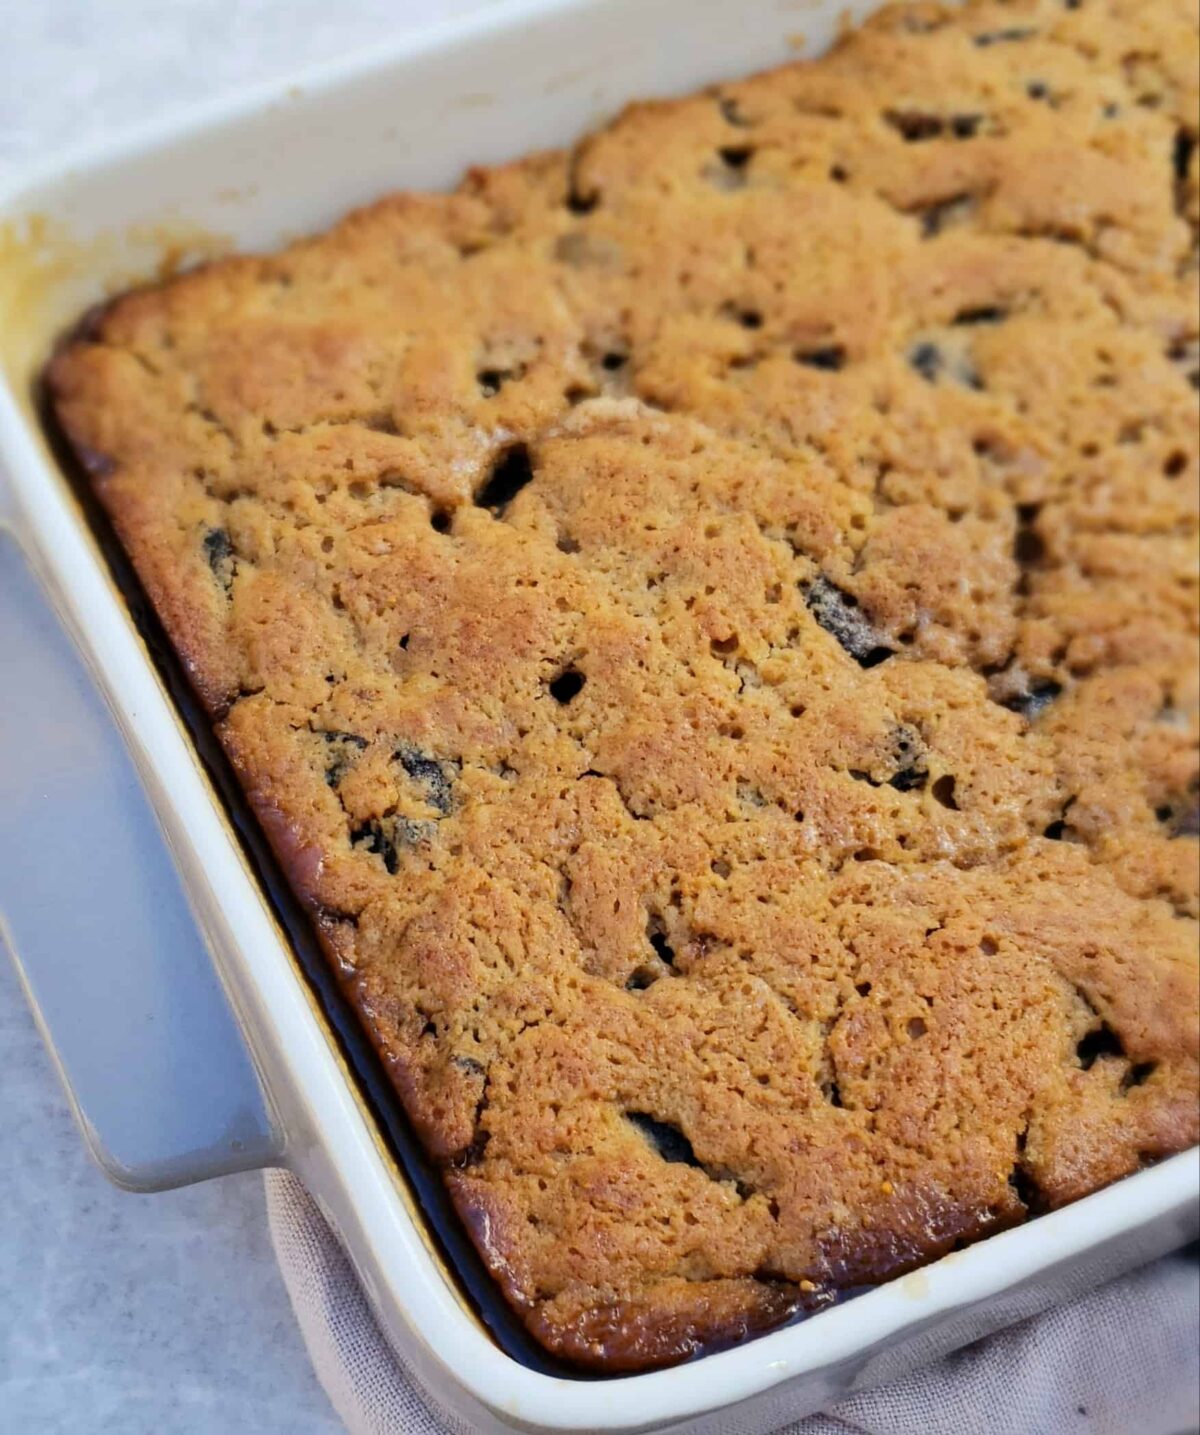 Mission fig cake with sauce in bottom of baking dish